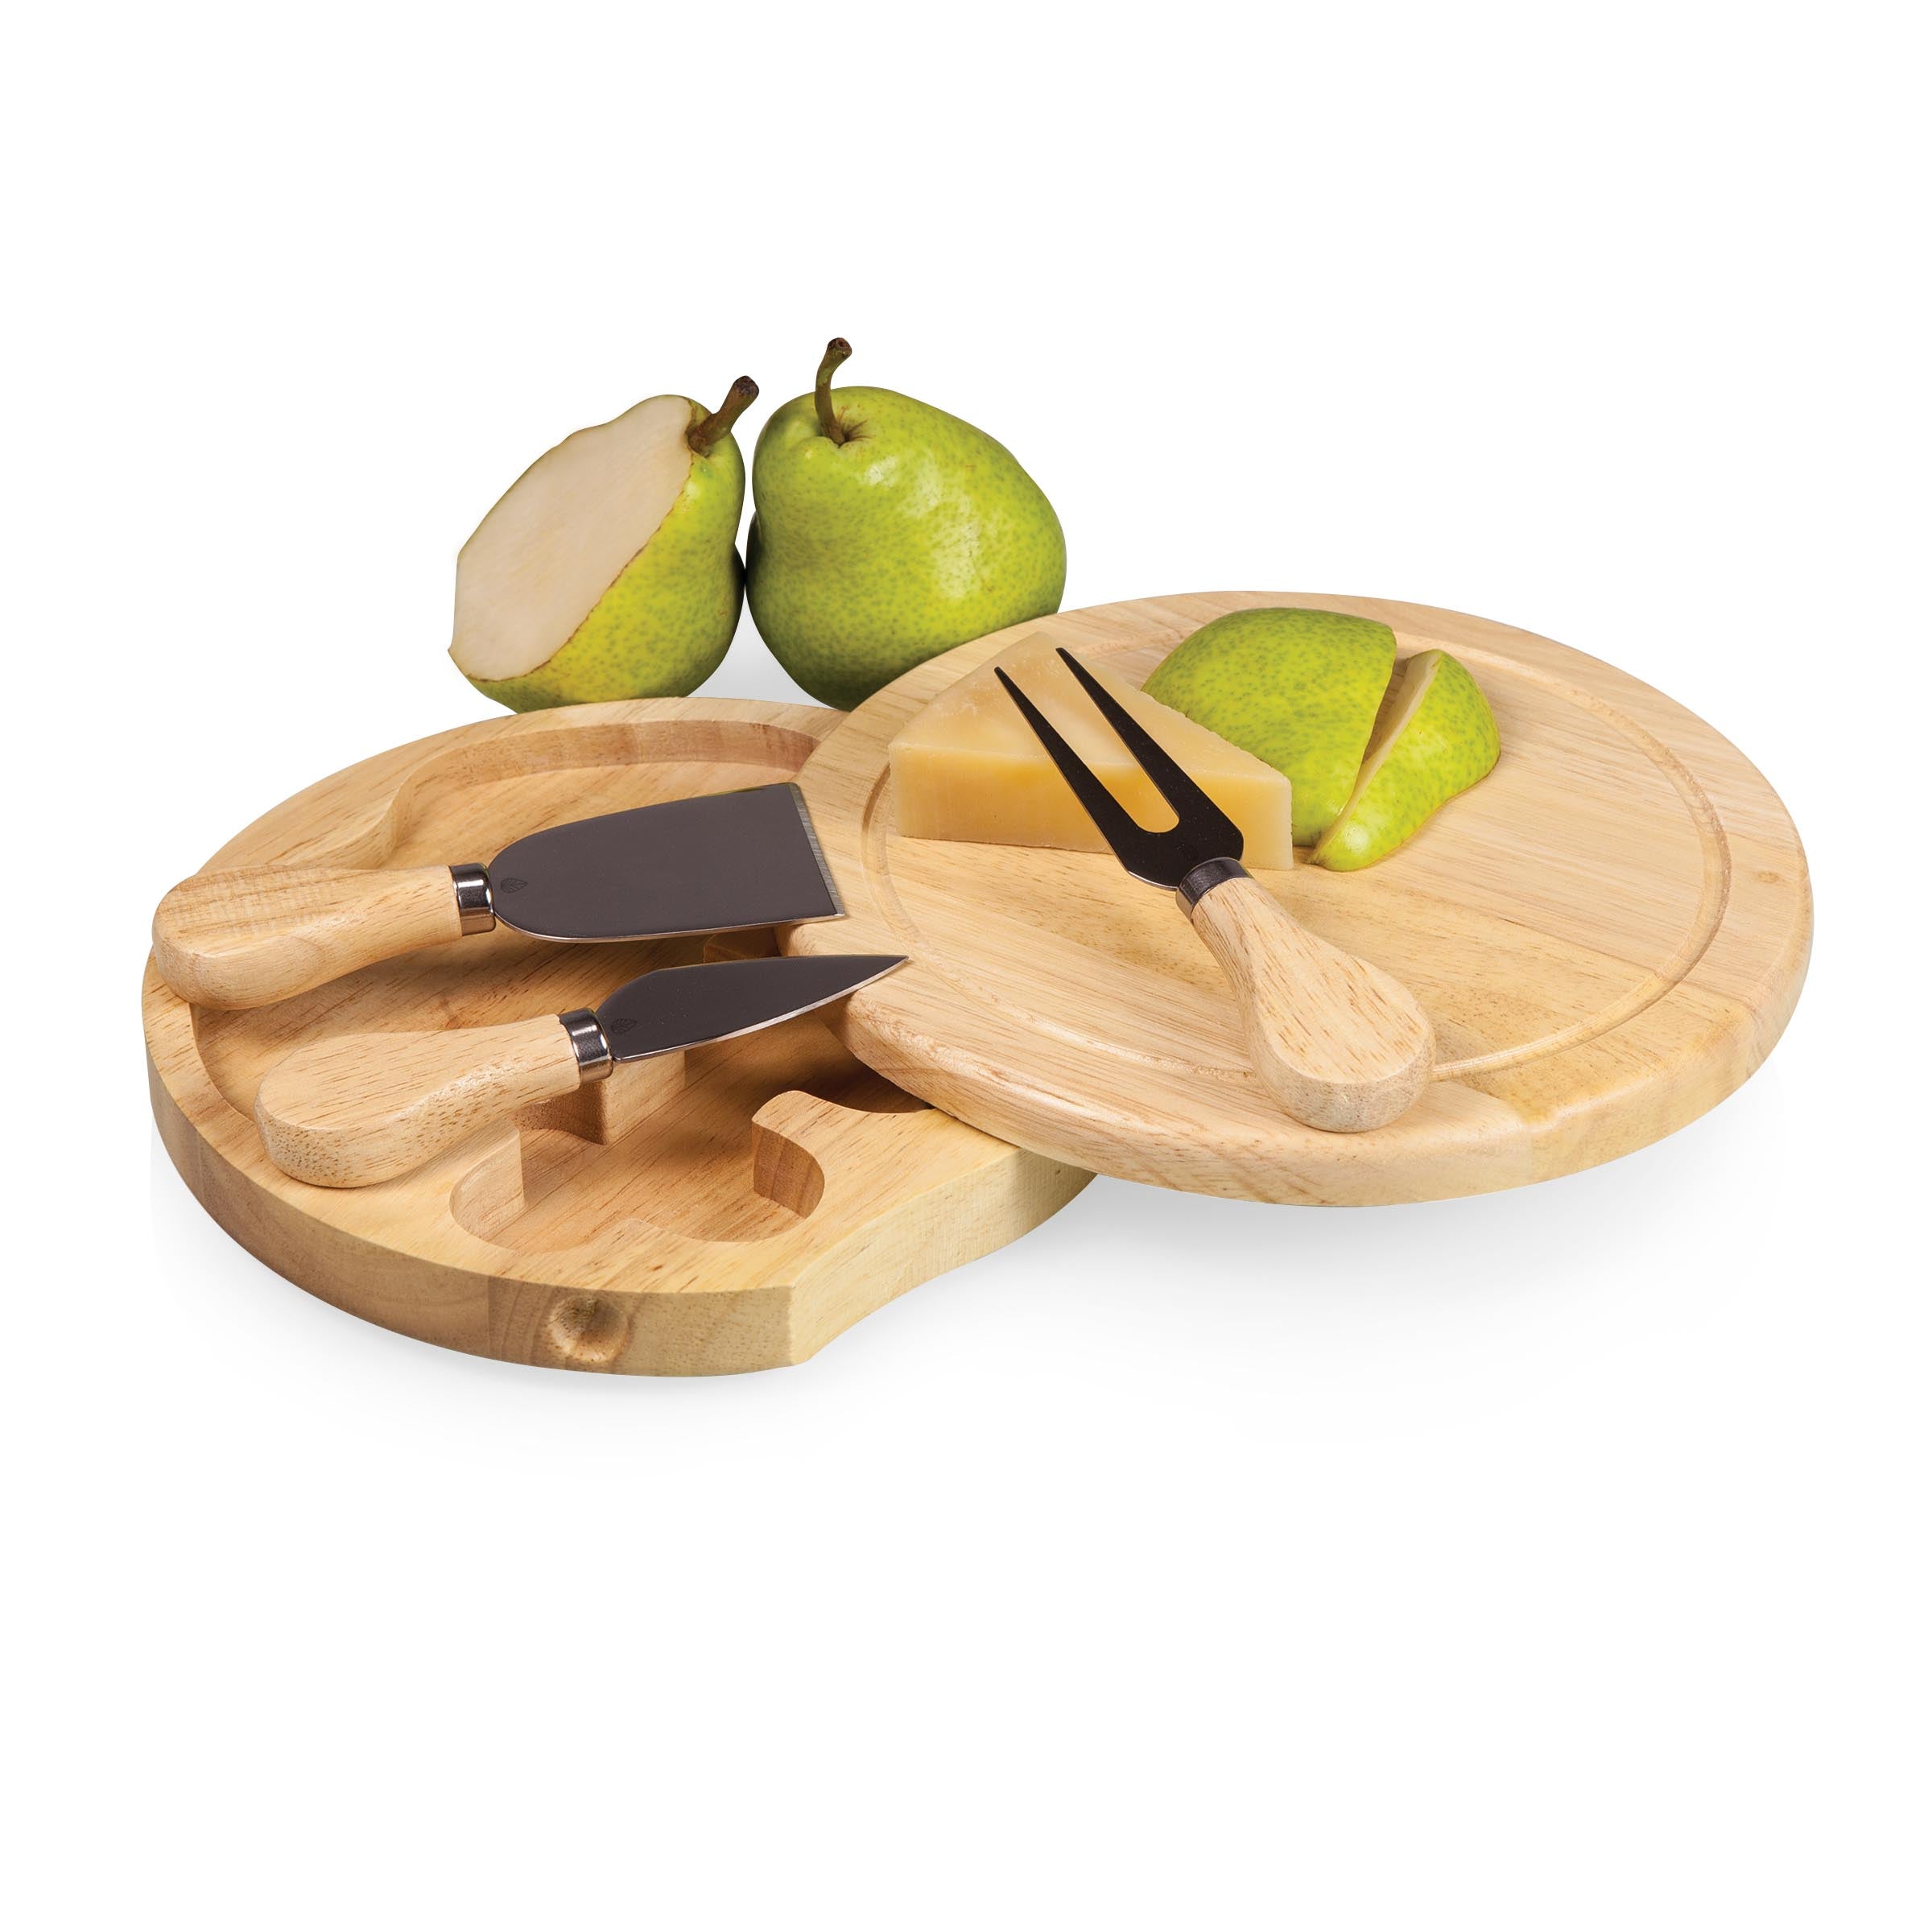 Wyoming Cowboys - Brie Cheese Cutting Board & Tools Set